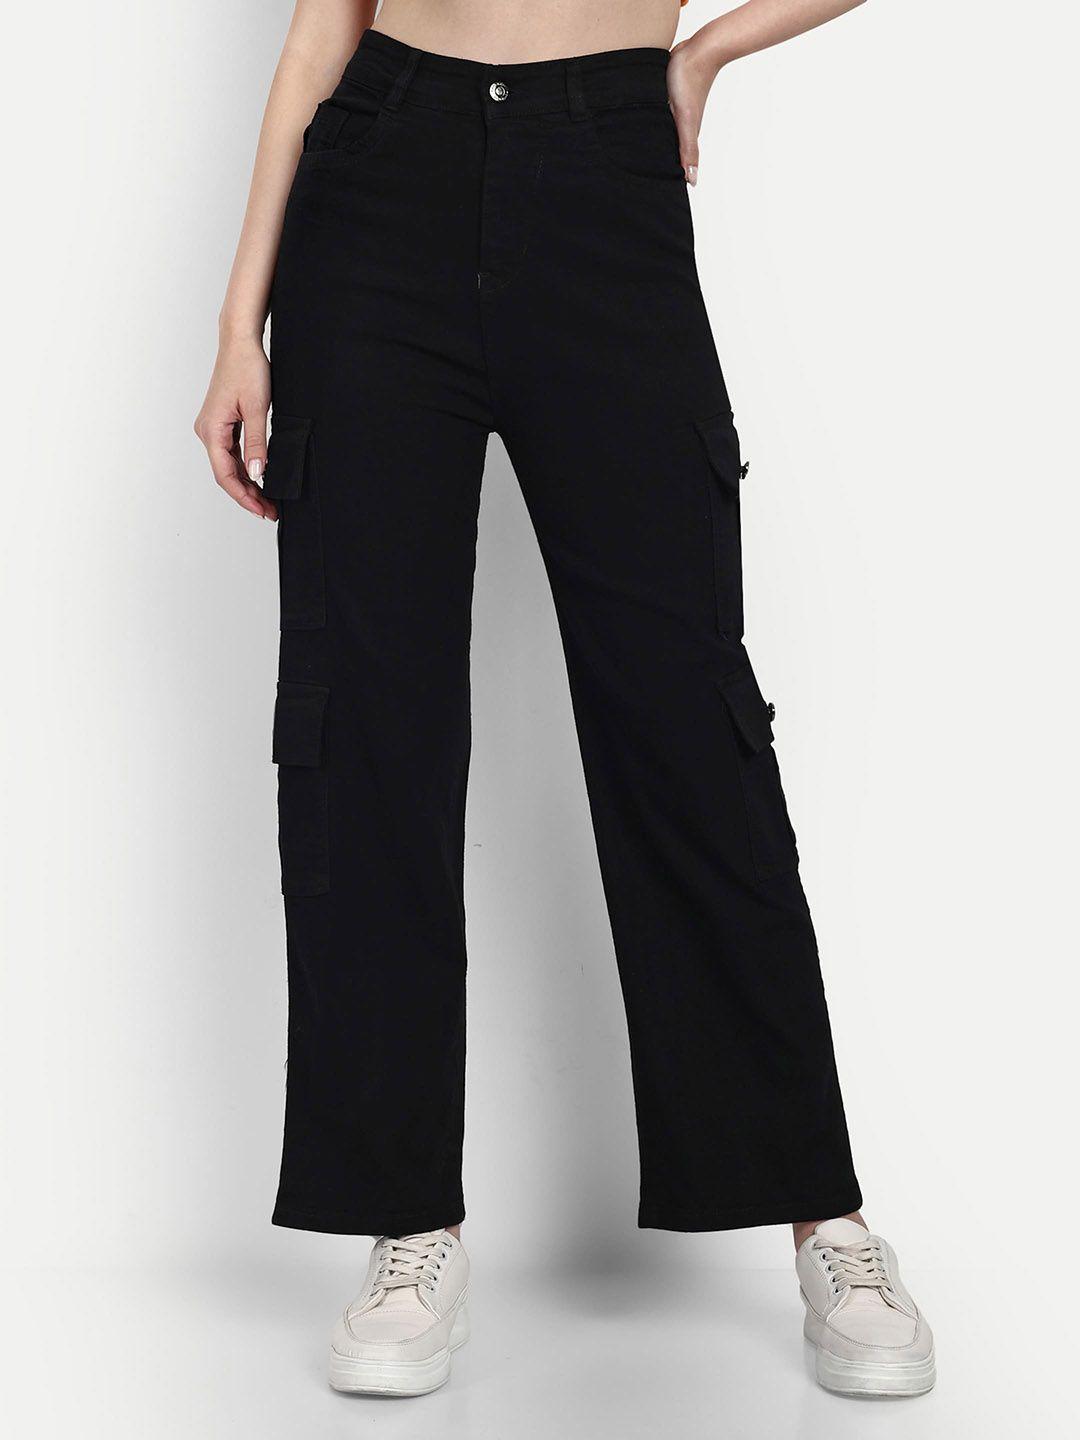 next one women black smart wide leg high-rise stretchable jeans